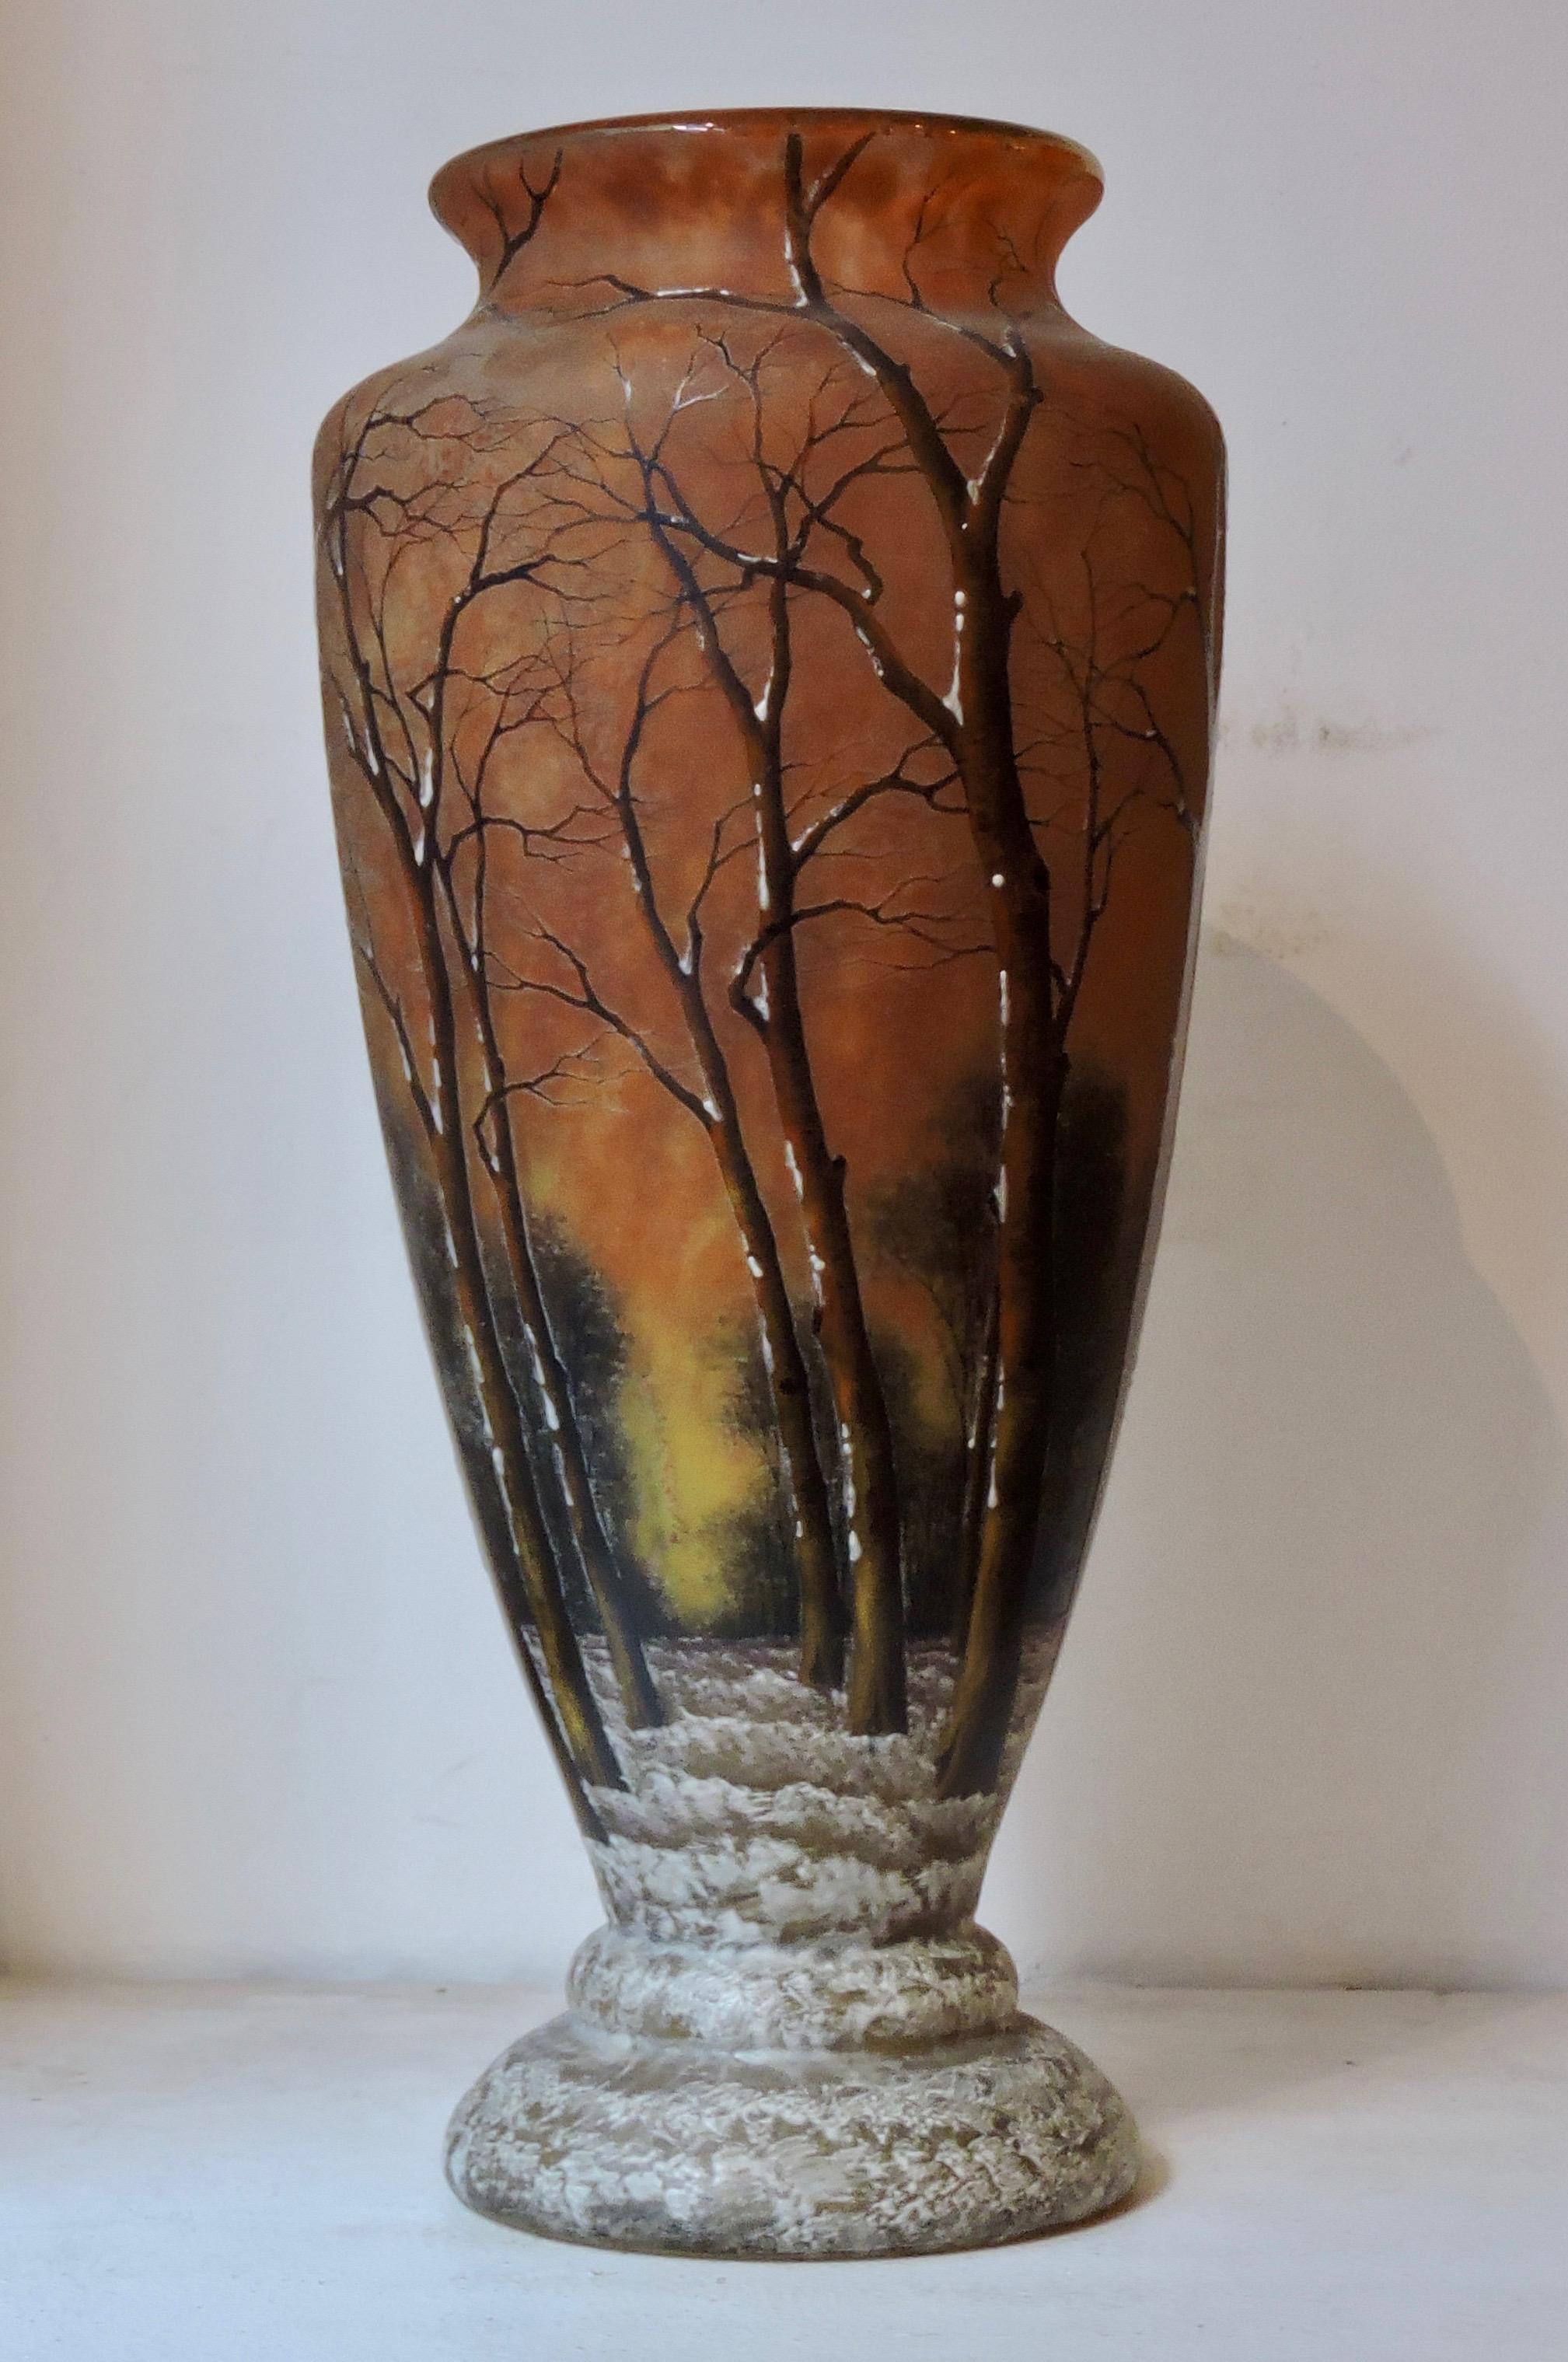 A French Daum Nancy enameled winter landscape glass vase, circa 1900
Acid-etched in relief and enameled in colors with trees and snow.
Signed Daum Nancy and Croix de Lorraine.